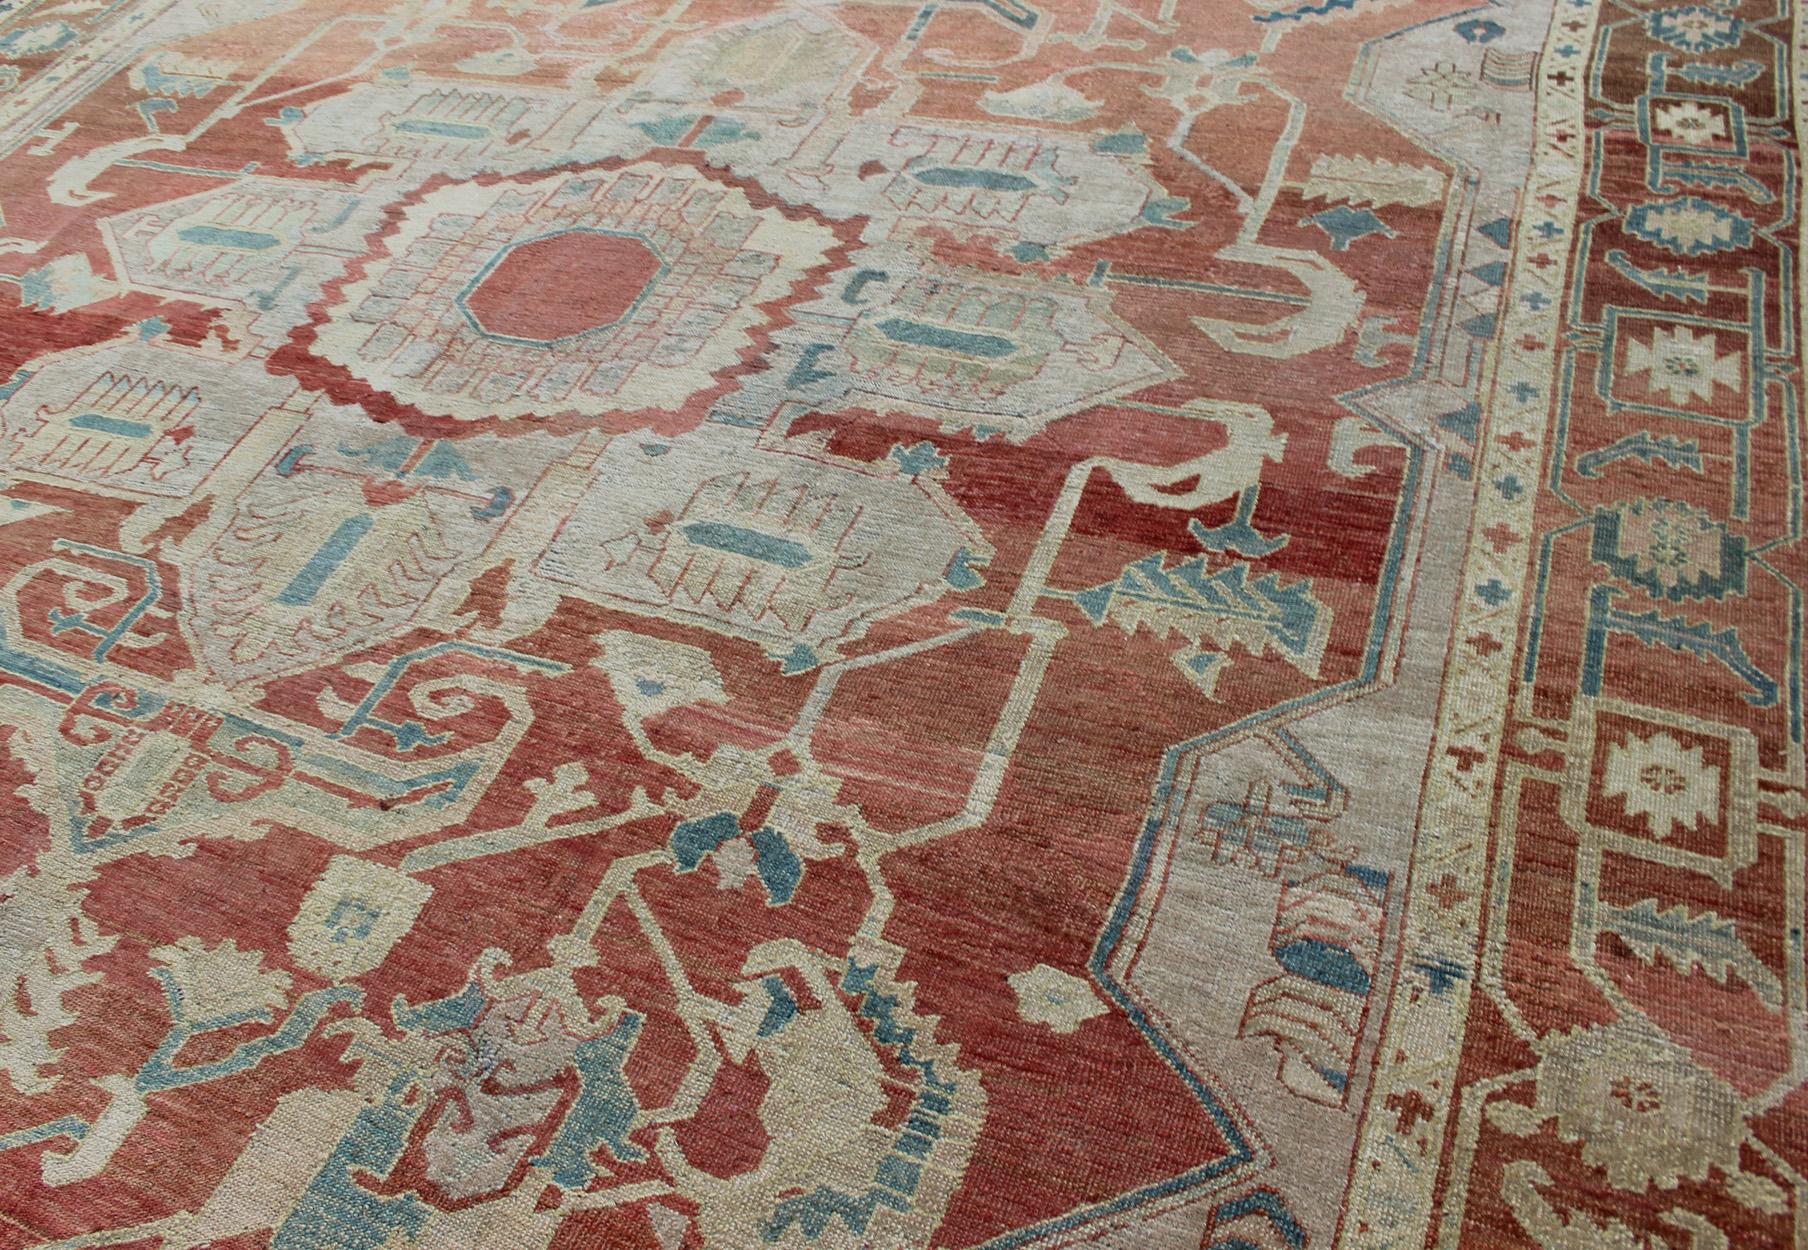 Antique Persian Large Serapi Rug in Soft Red, Taupe, Light Teal and Blue For Sale 2